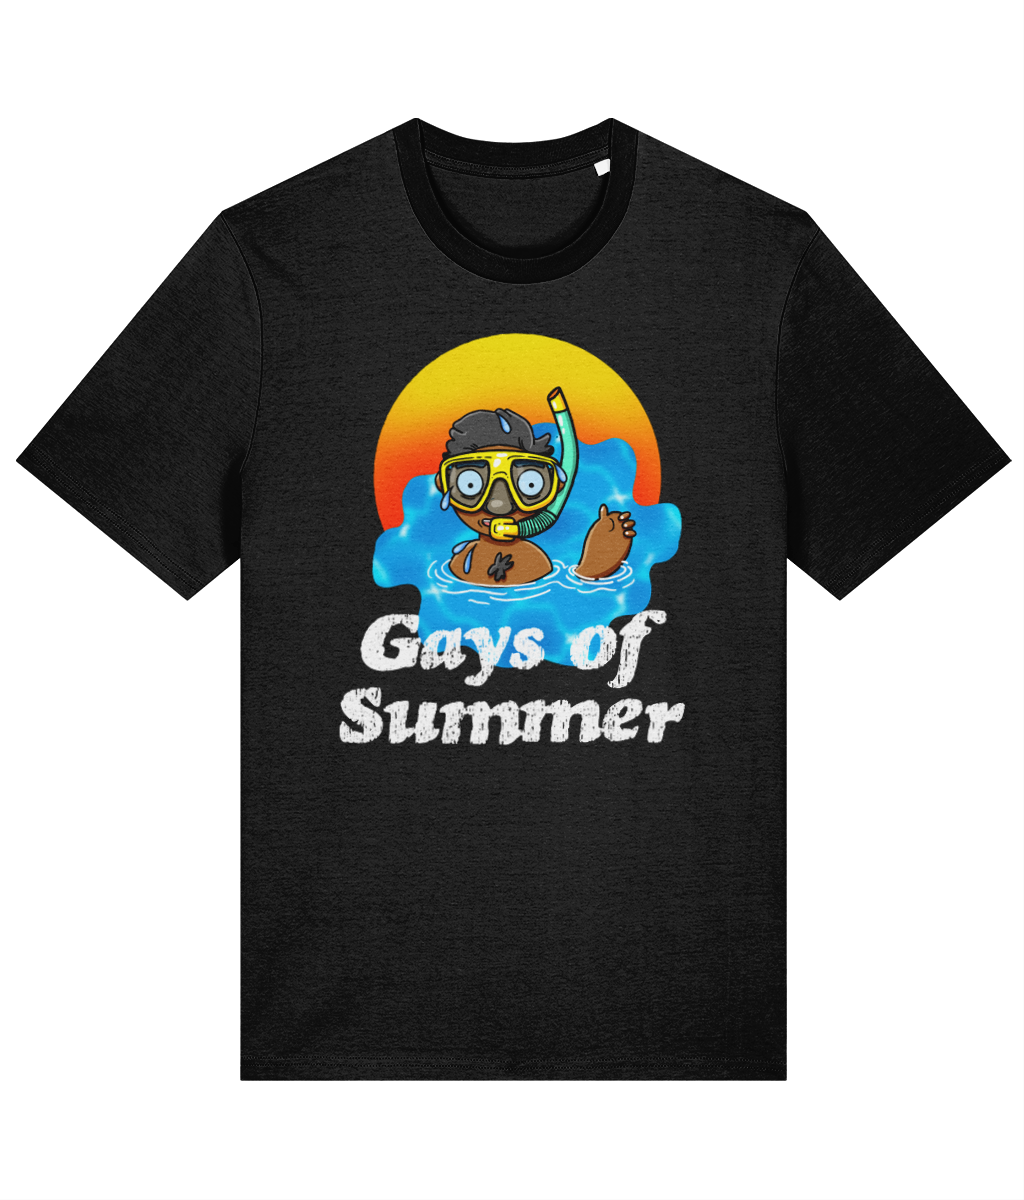 Gays of Summer Going Down T-Shirt